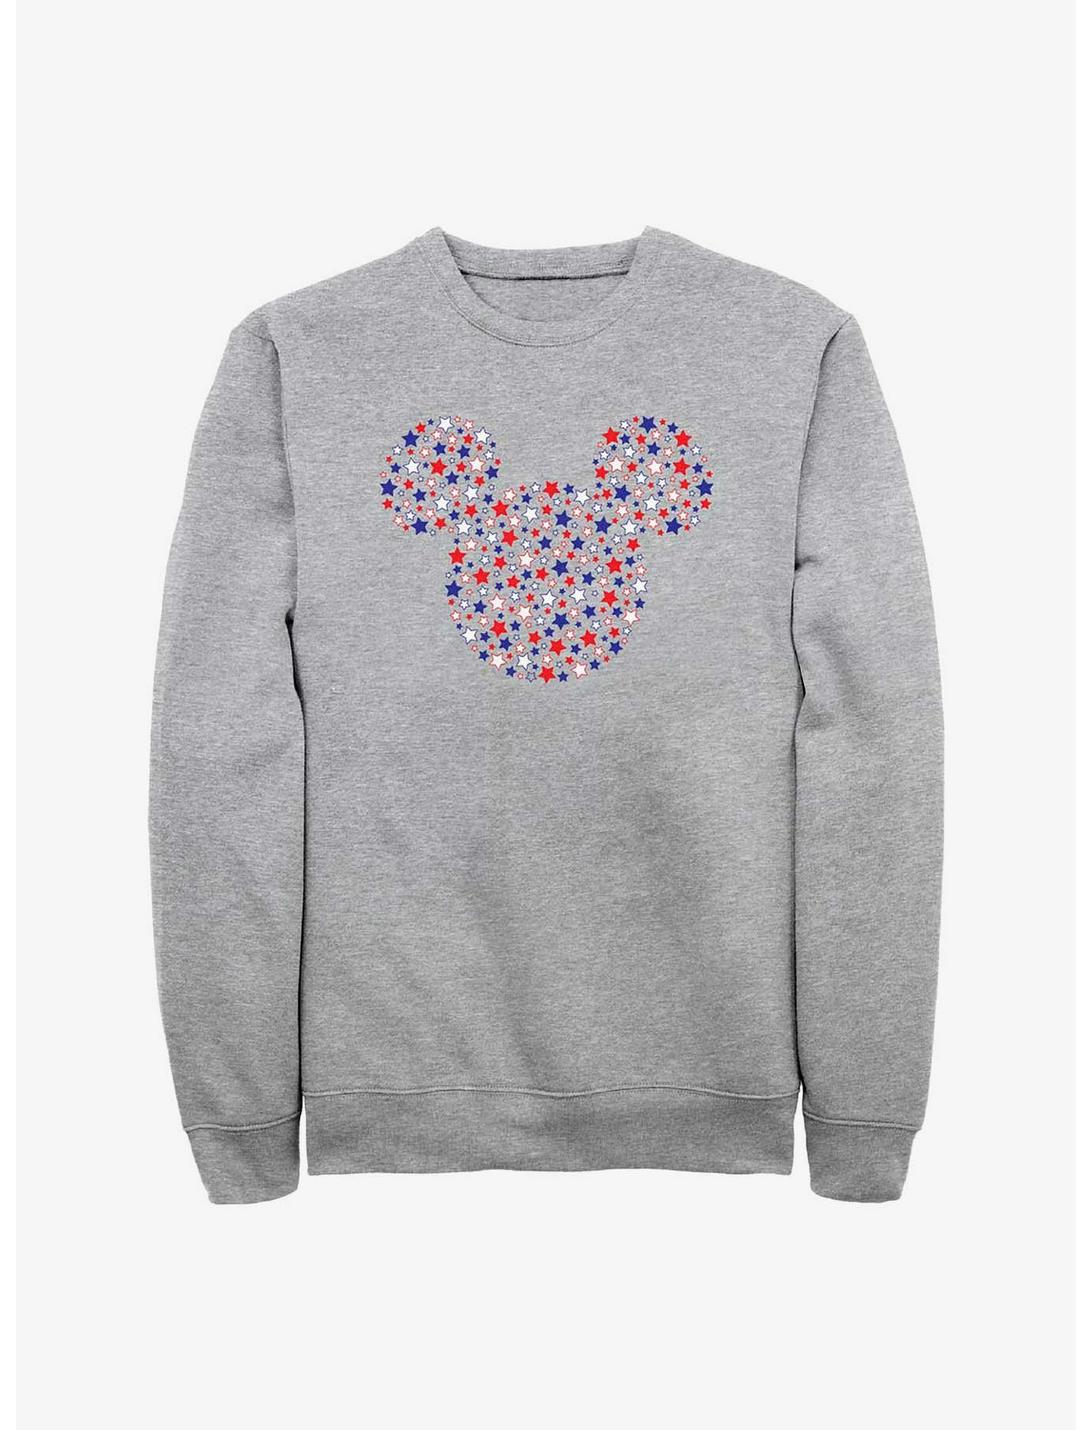 Disney Mickey Mouse Stars And Ears Sweatshirt, ATH HTR, hi-res